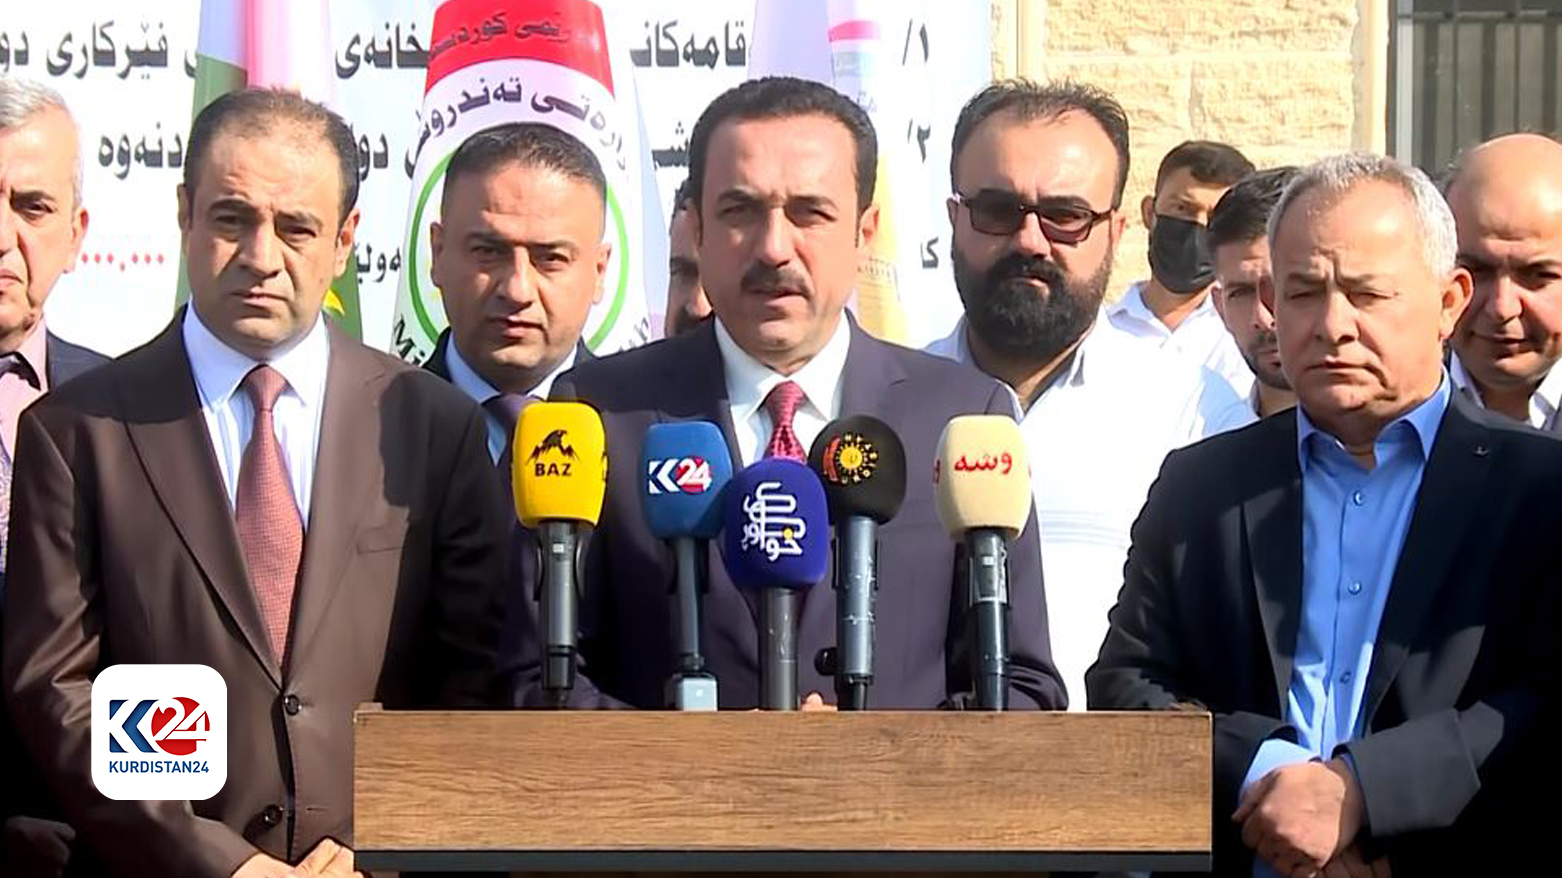 Erbil Governor Omed Khoshnaw speaking at the press conference, Oct. 28, 2023. (Photo: Kurdistan 24)